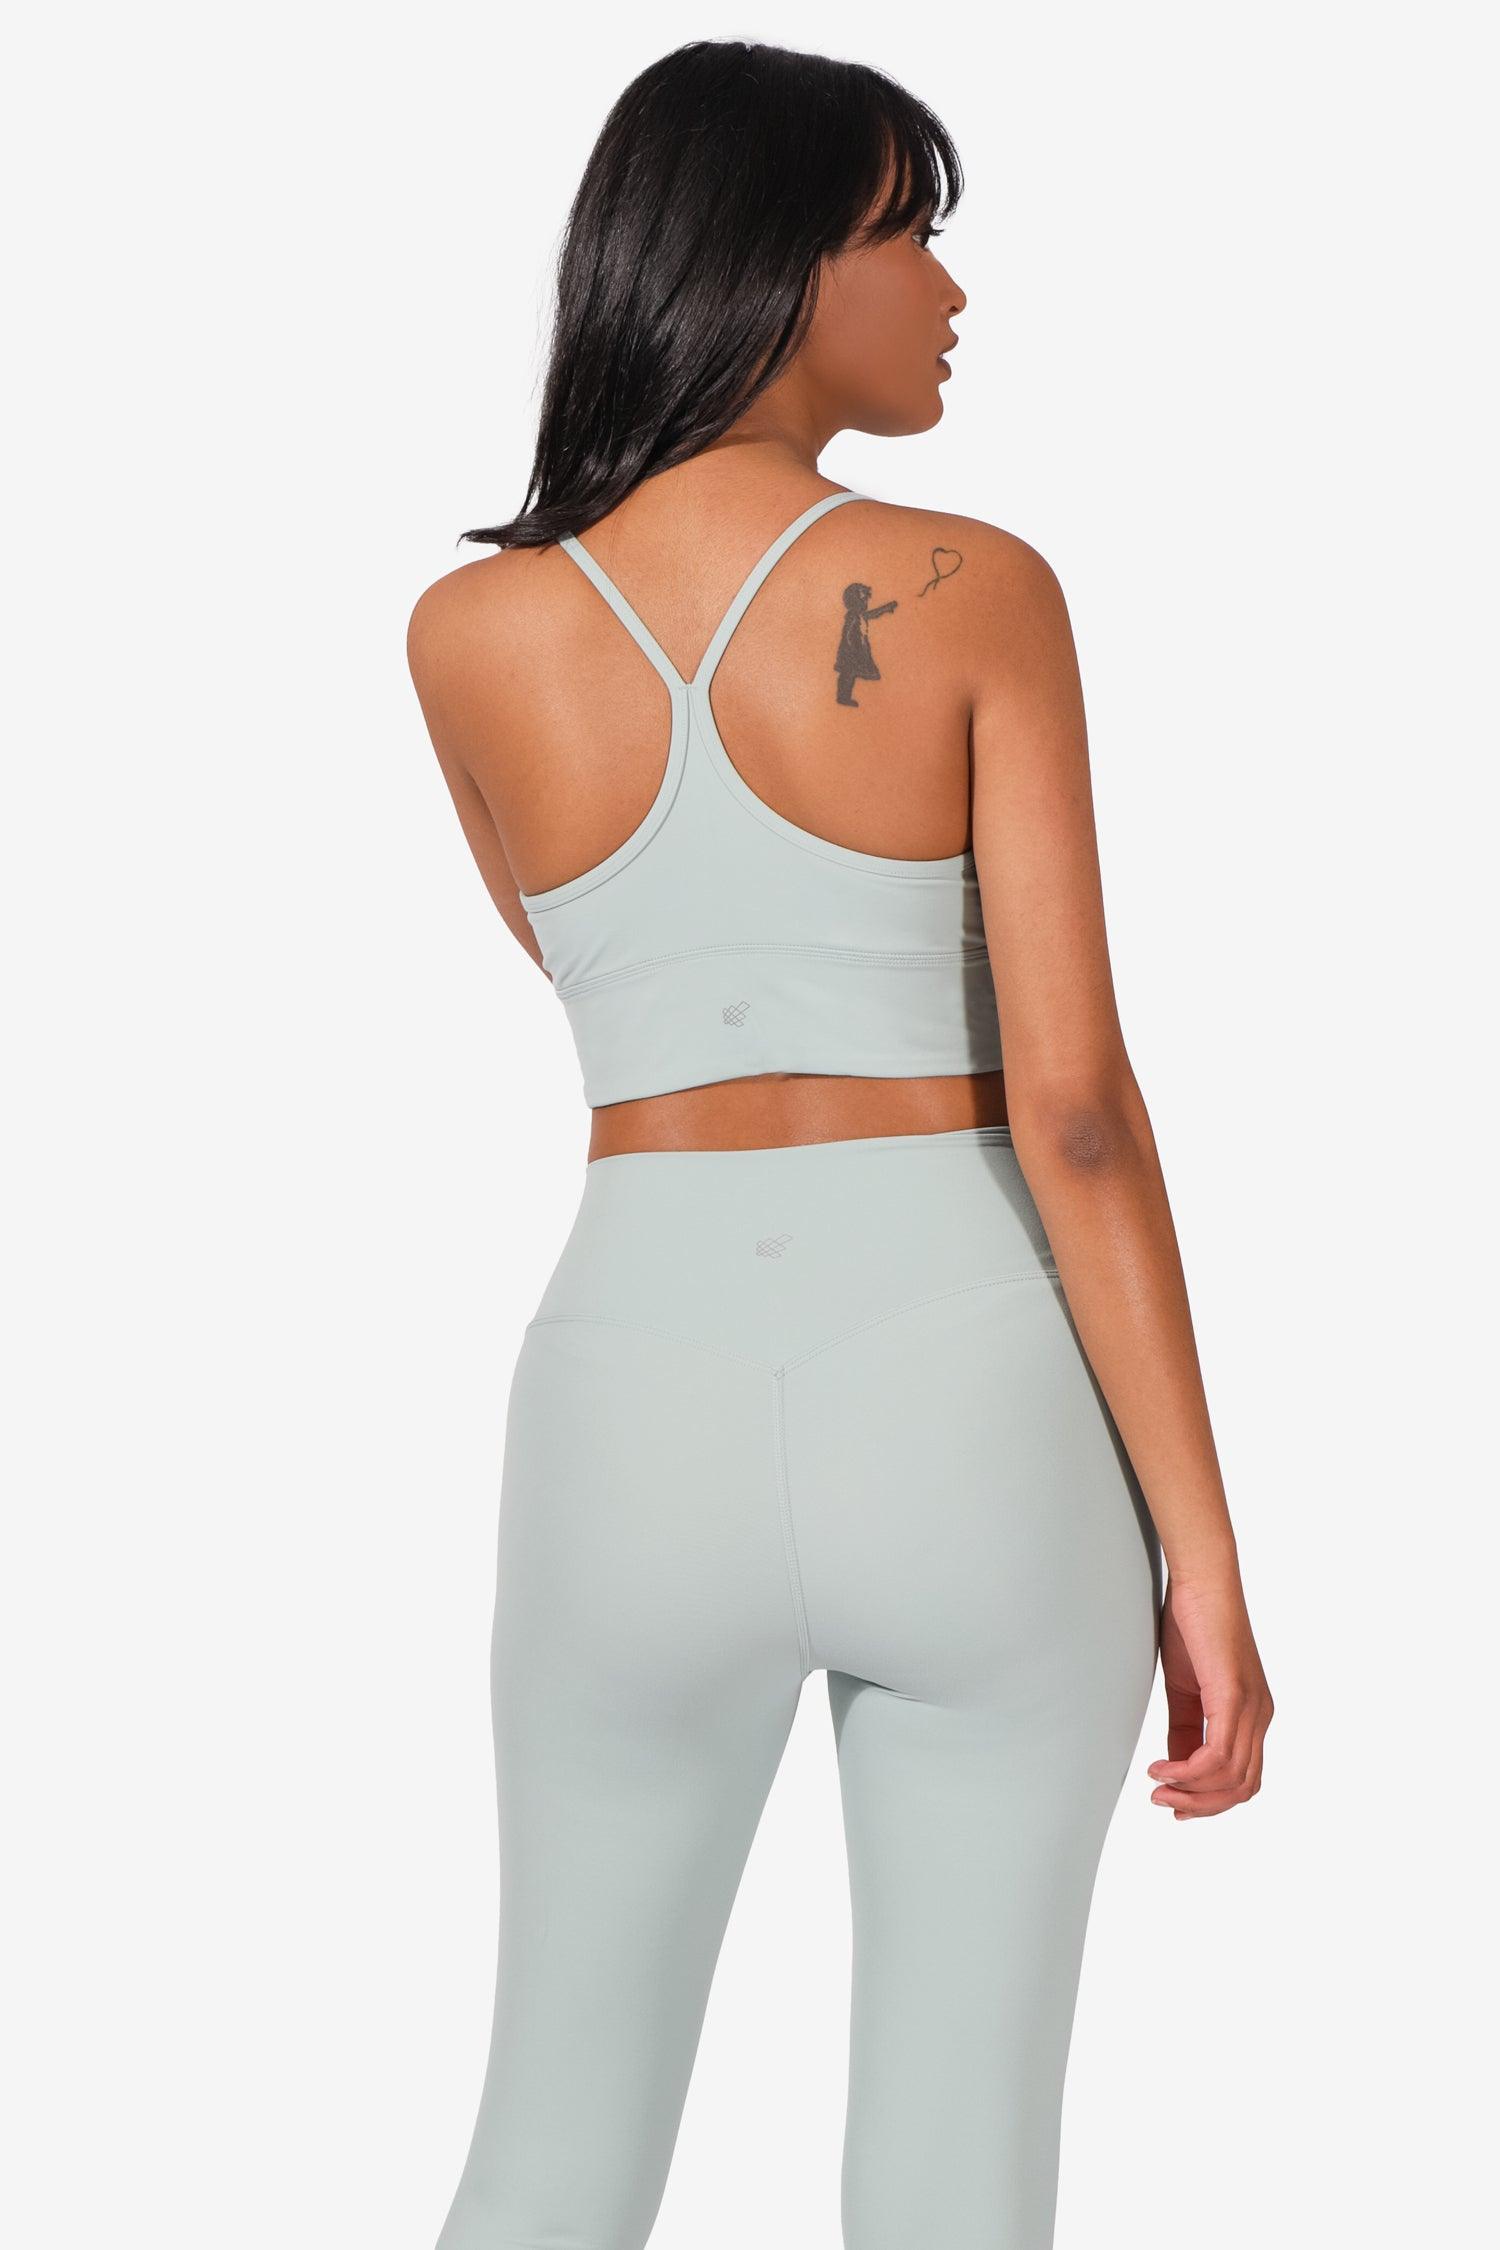 Sports Bras in Every Style and Price - LVBX